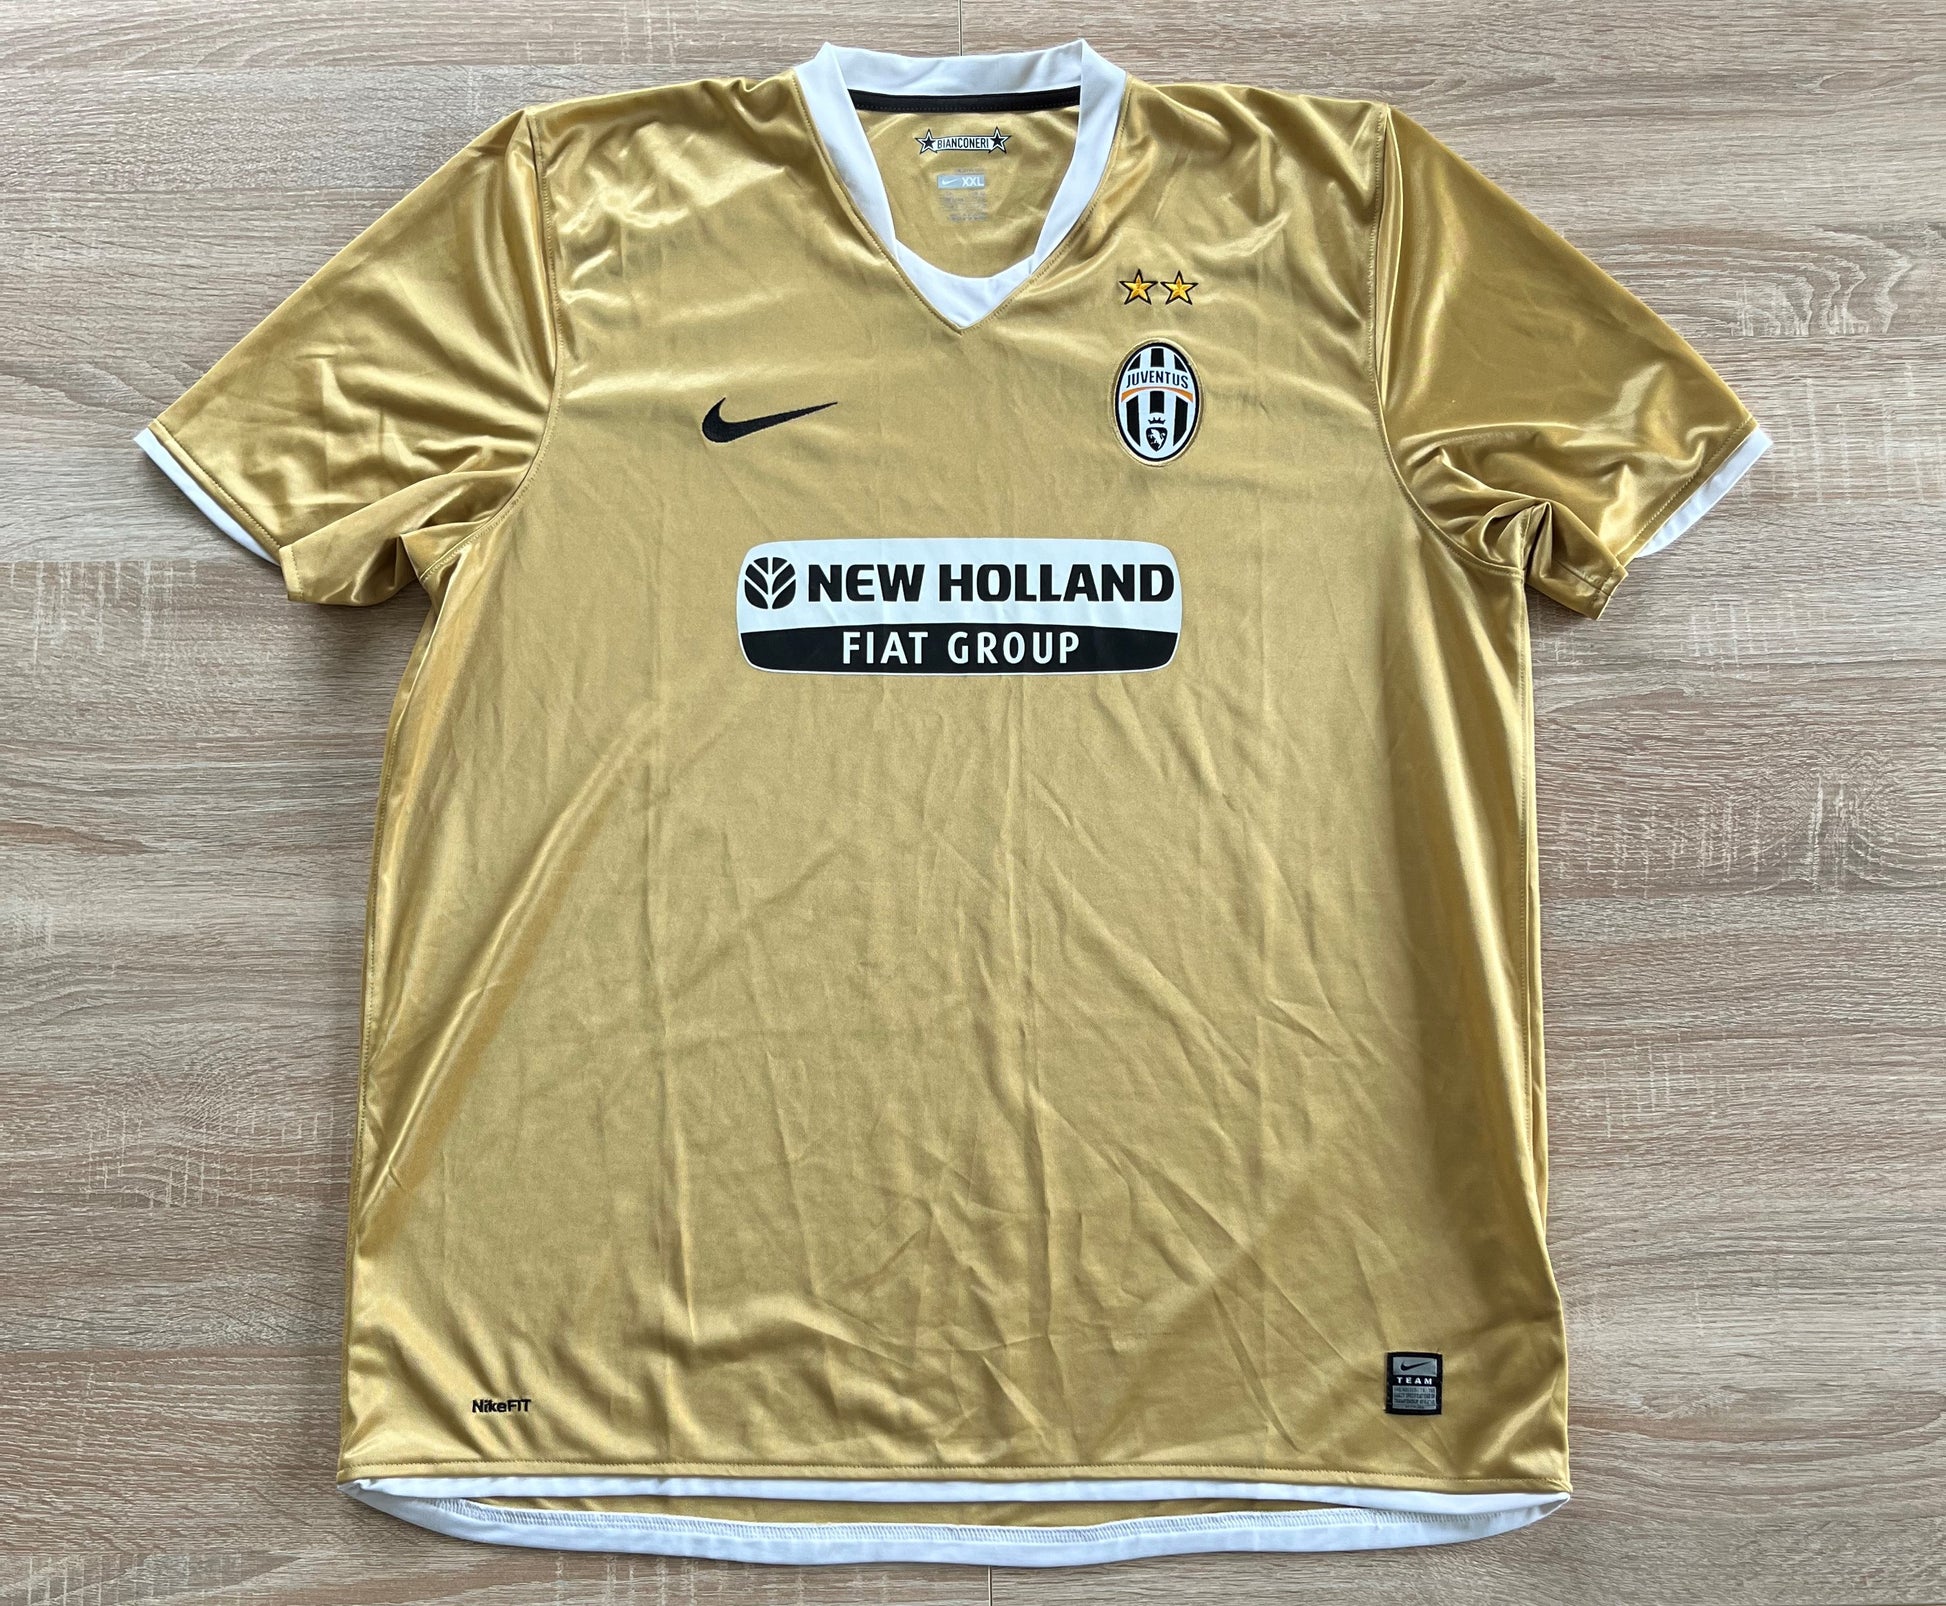 Juventus Away Shirt from 2008-2009: The away jersey worn by Juventus during the 2008-2009 season. With its unique design and the club's emblem, this shirt captures the essence of the team's representation and efforts on the field in that specific period.